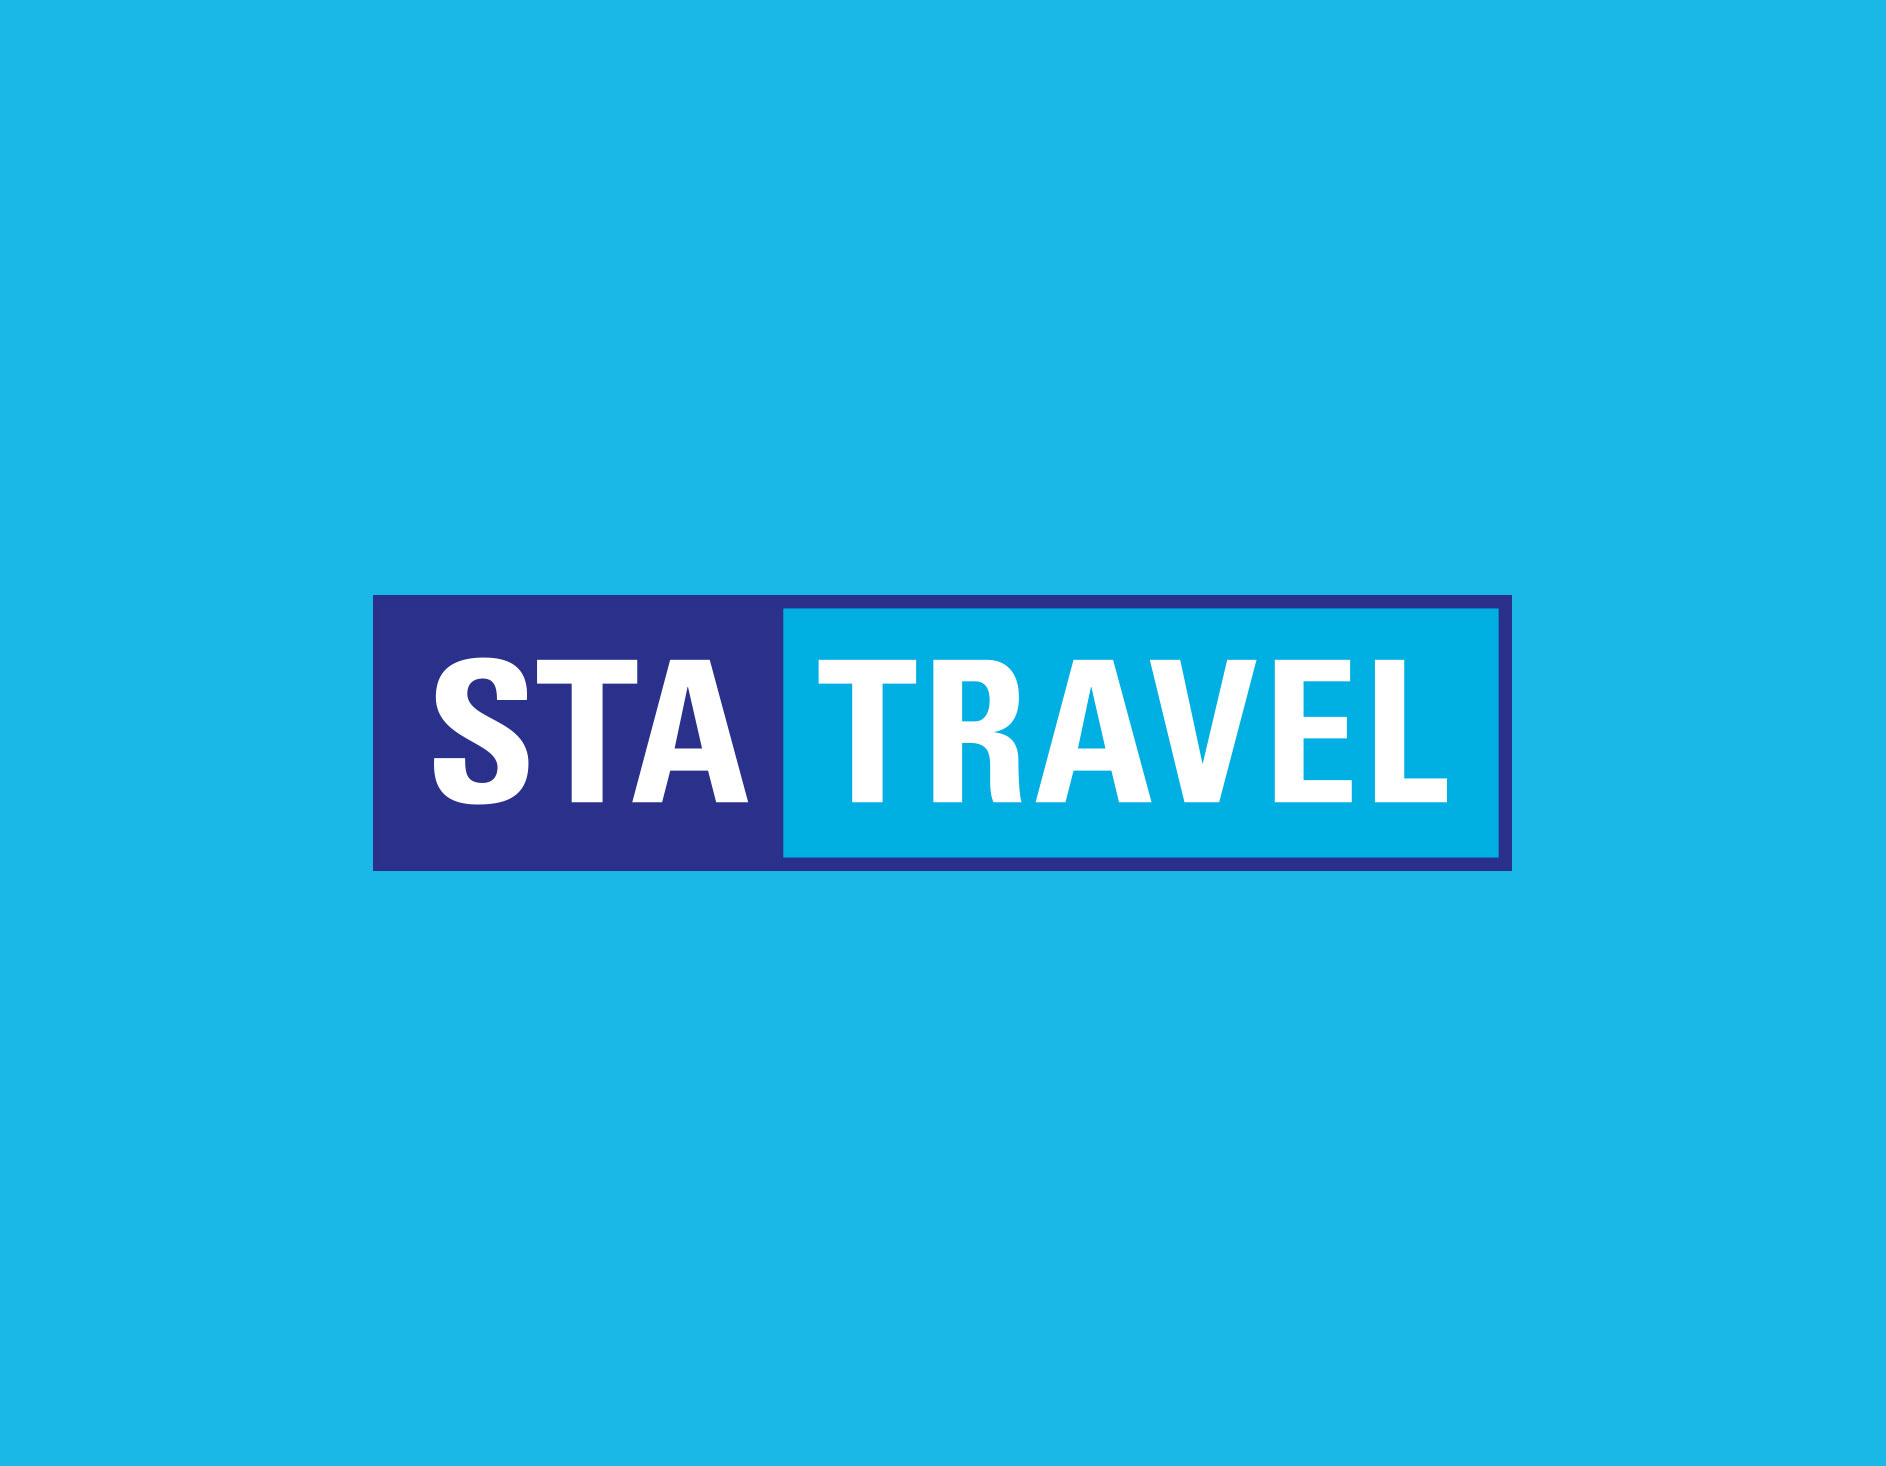 sta travel contact details